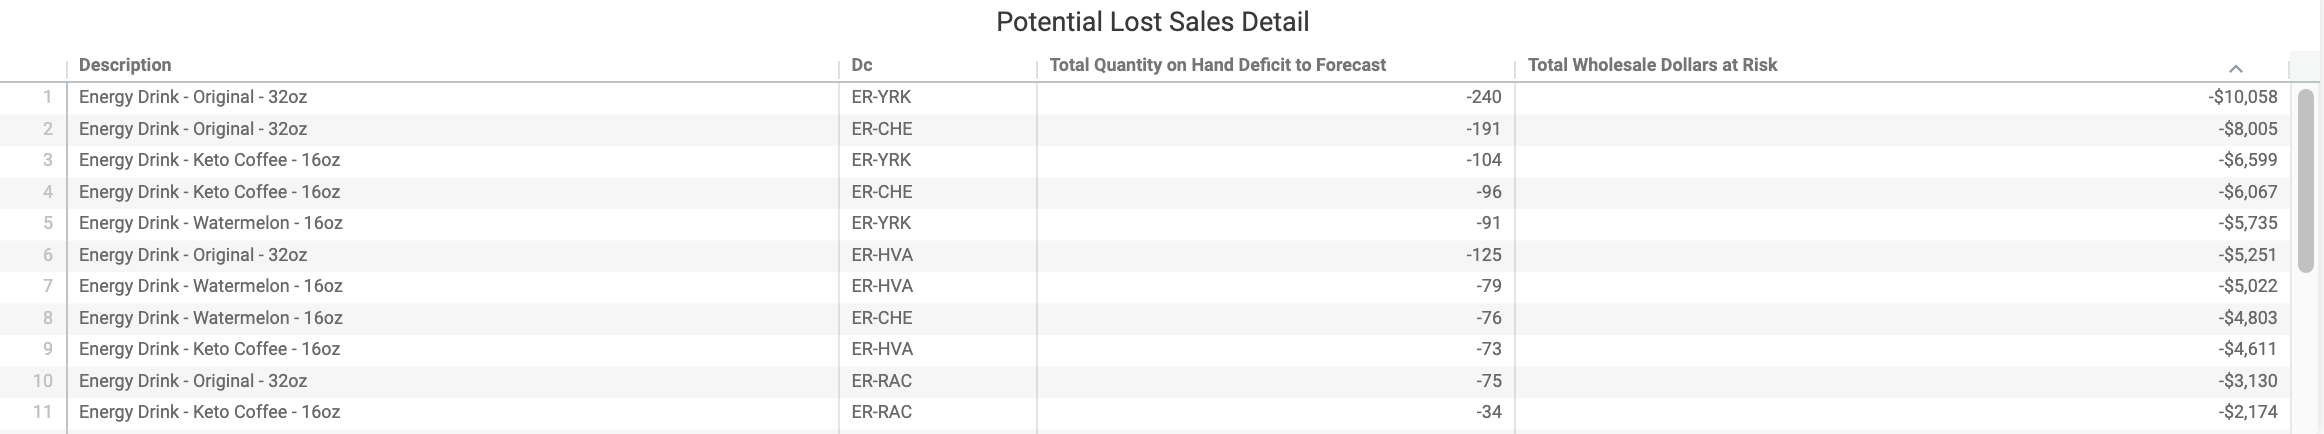 potential_lost_sales_003.png